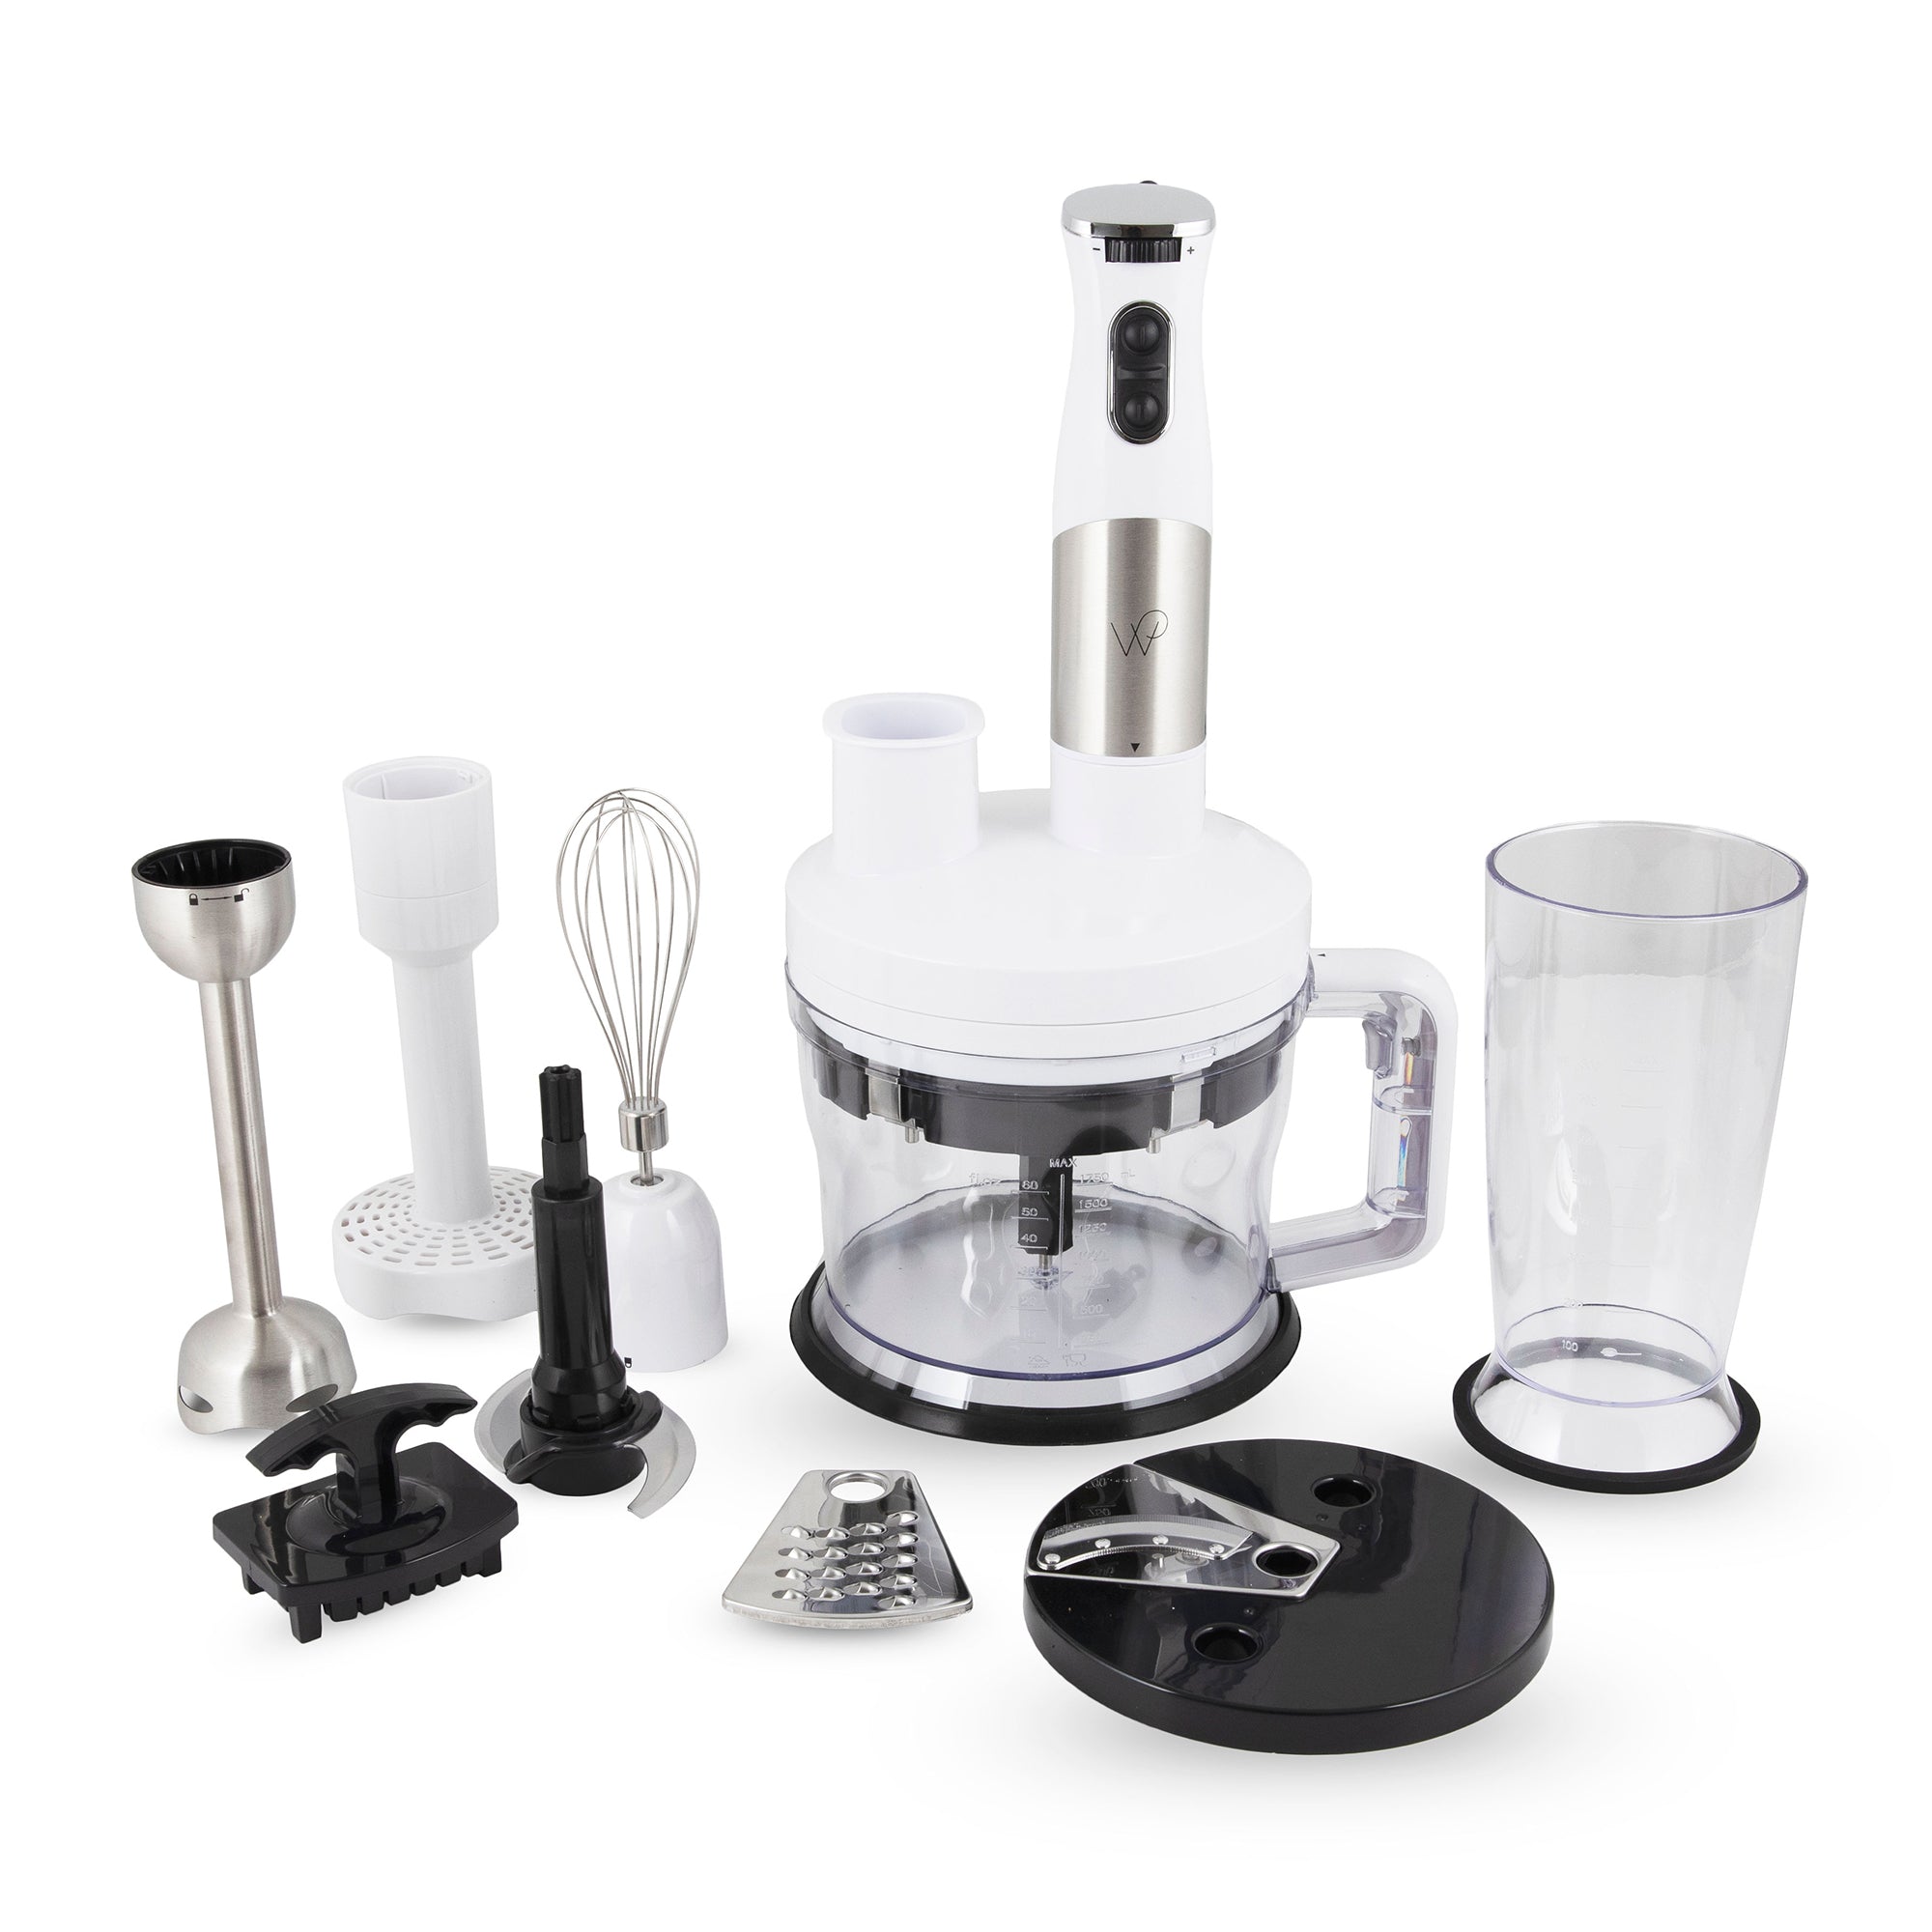 Wolfgang Puck 7-in-1 Immersion Blender – Wolfgang Puck Home